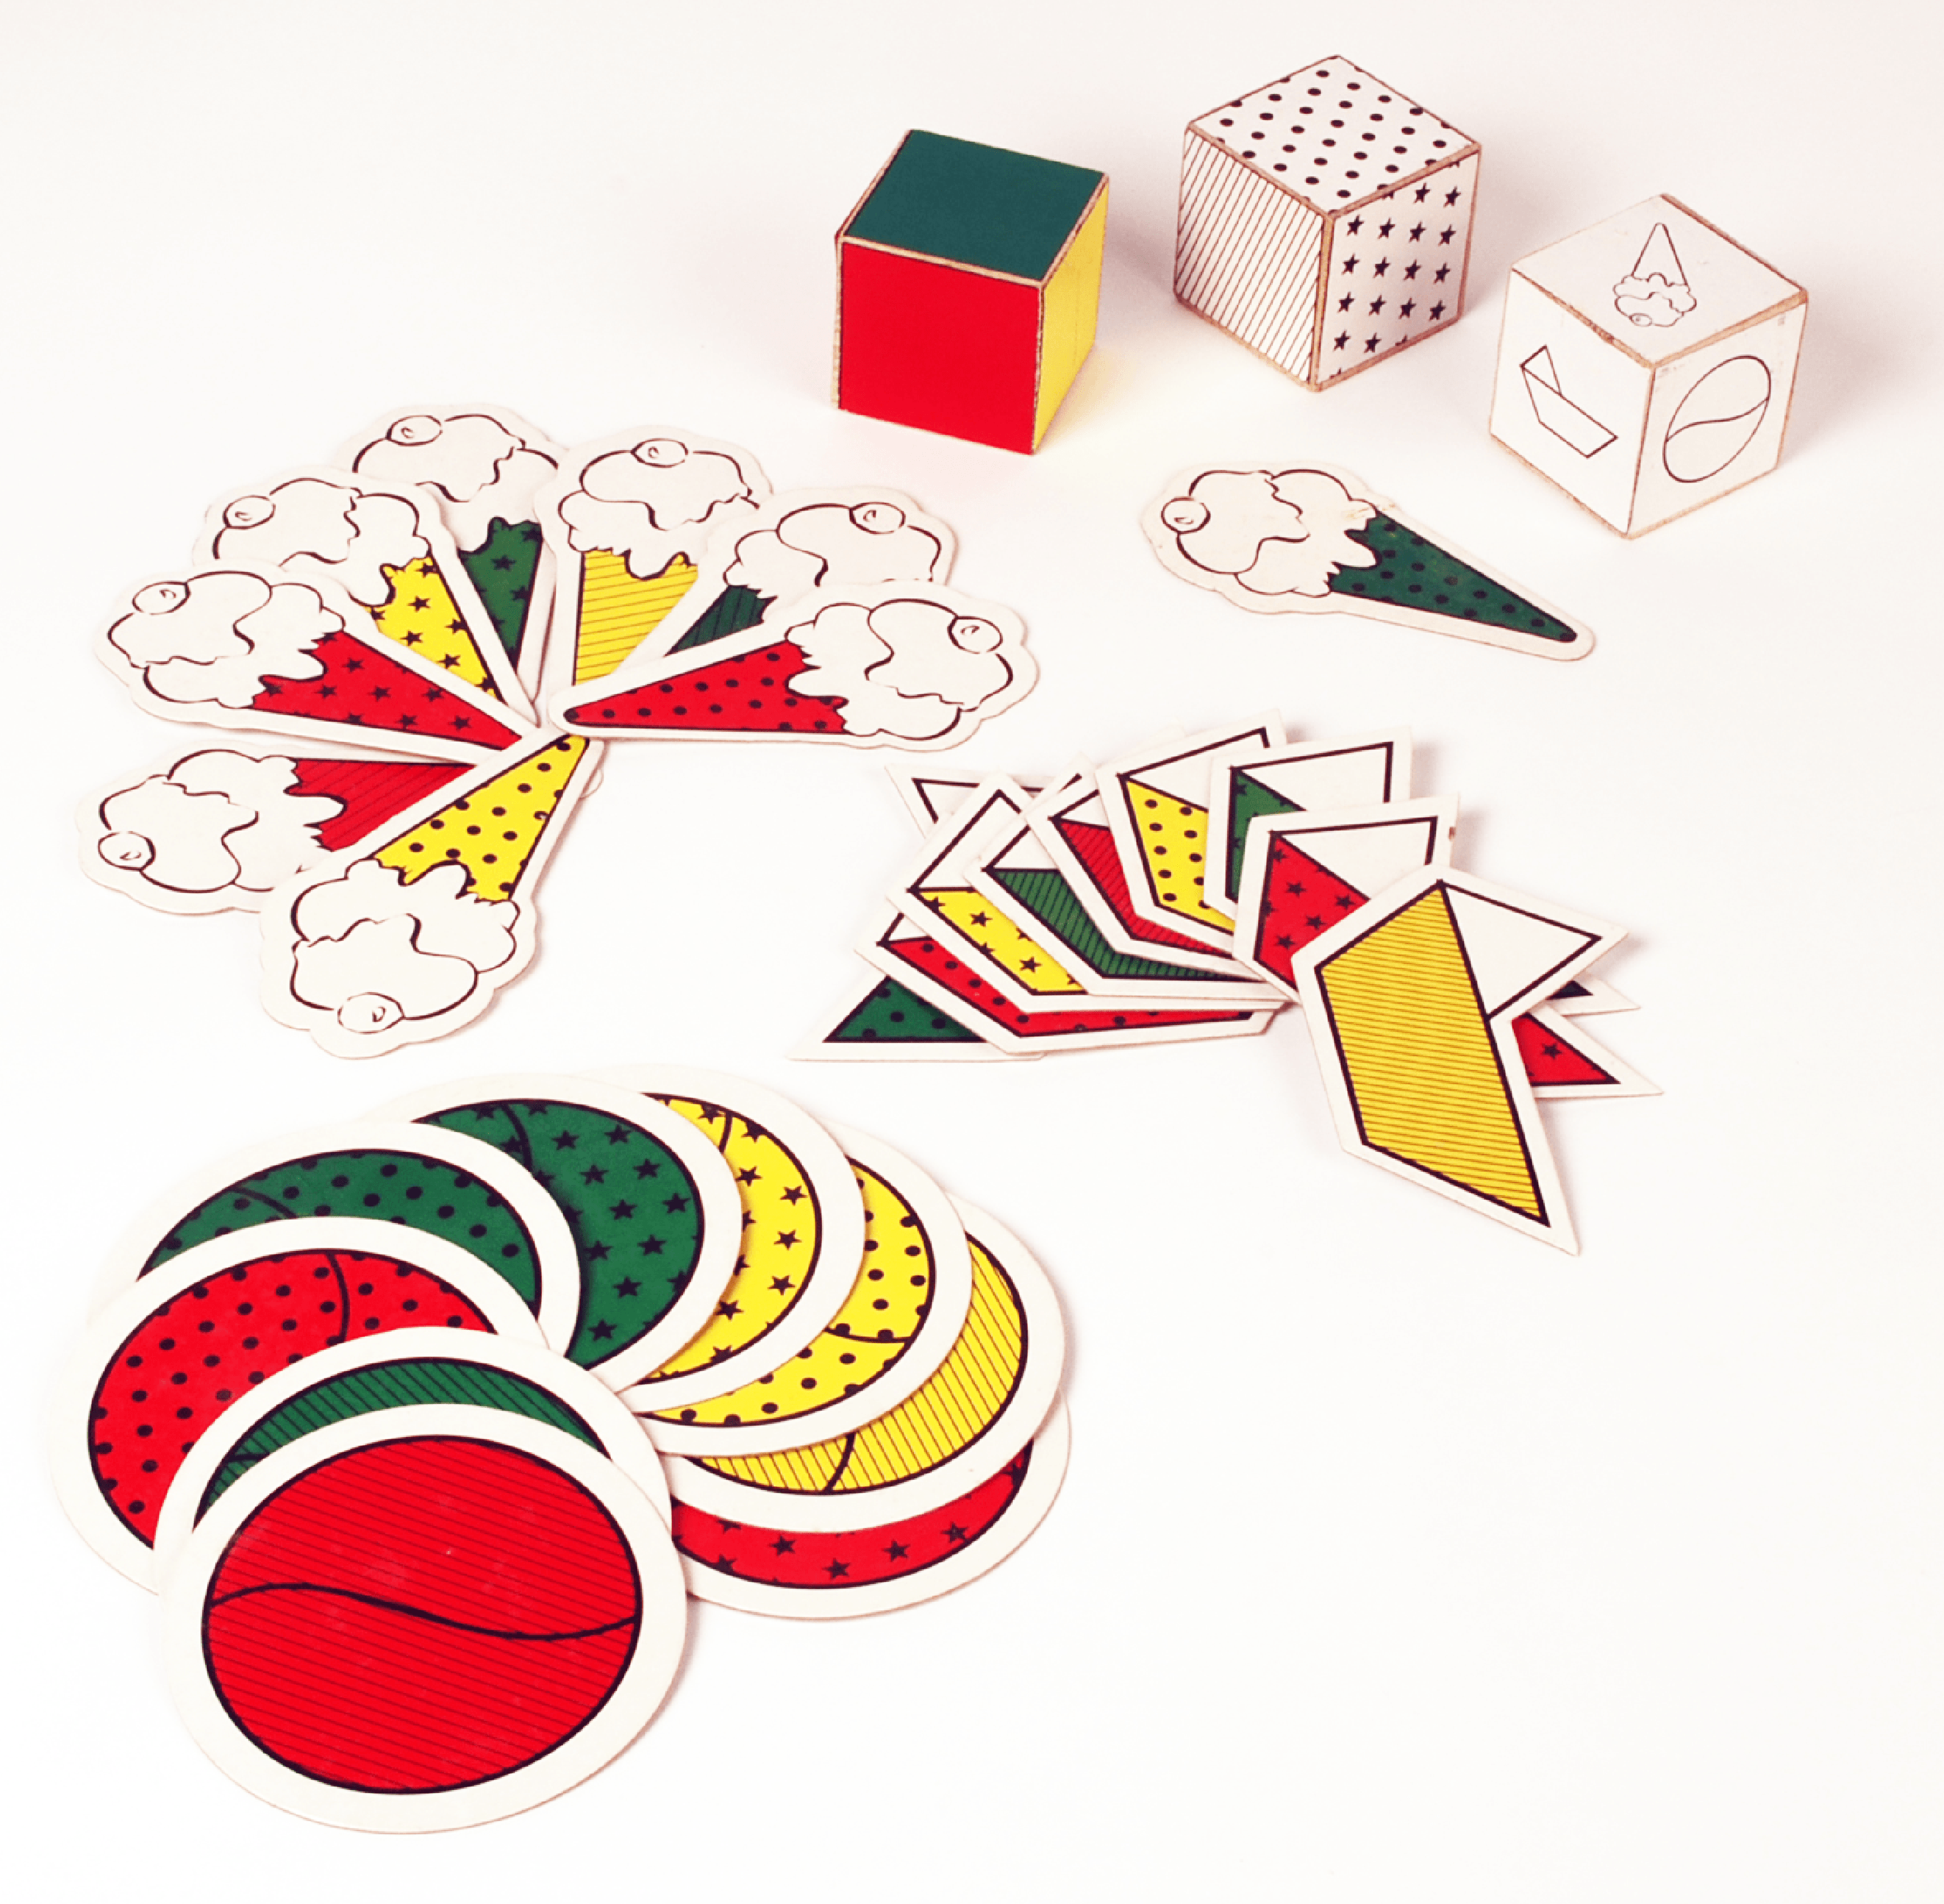 Shape, Colour, Pattern, Dice - Classification Game for Cognitive Mathematical Learning